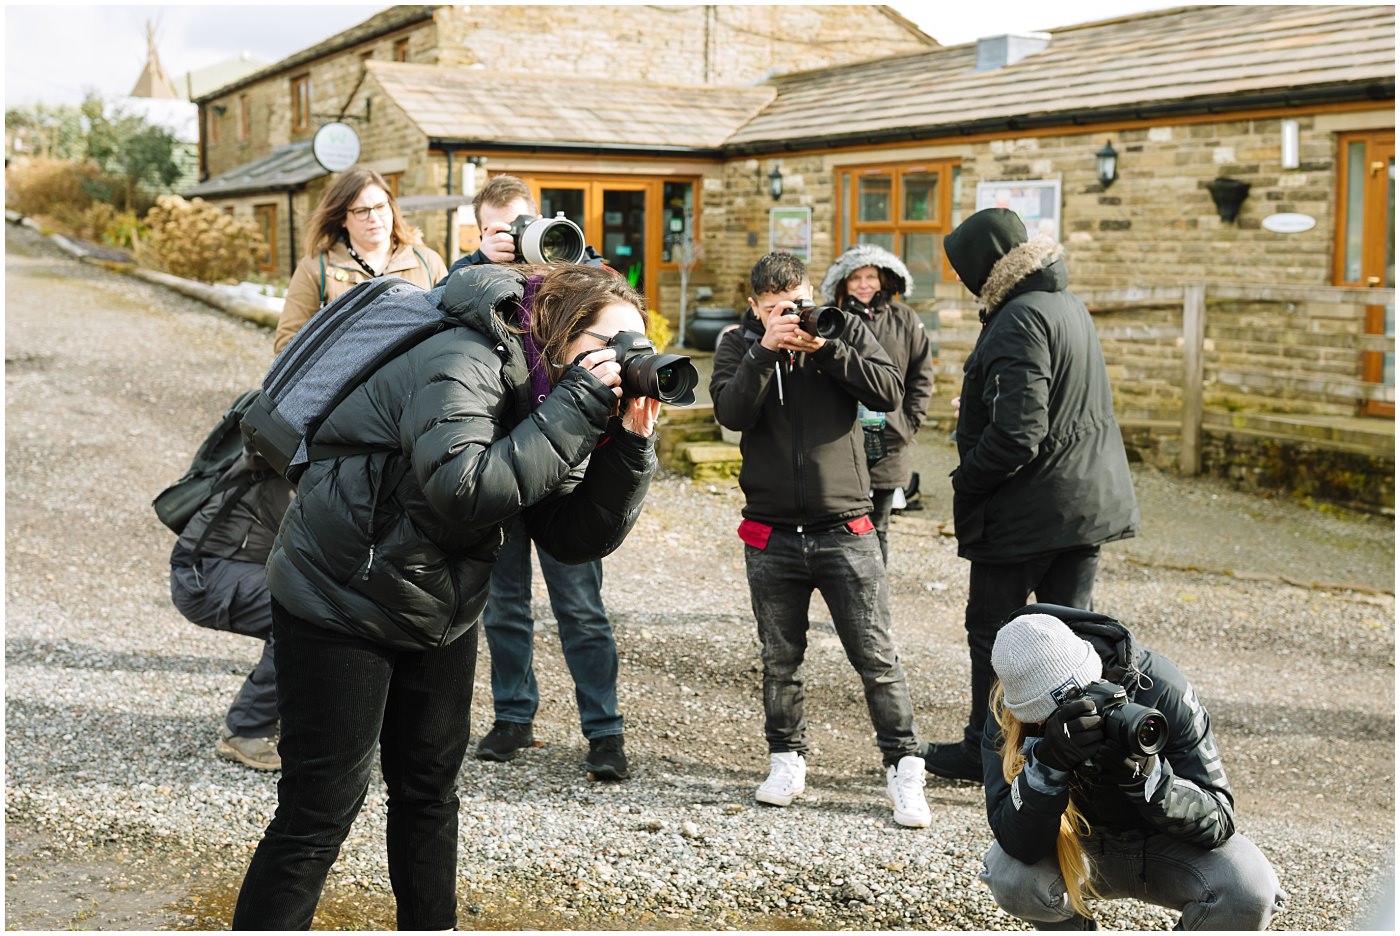 Photography Workshop at The Wellbeing Farm